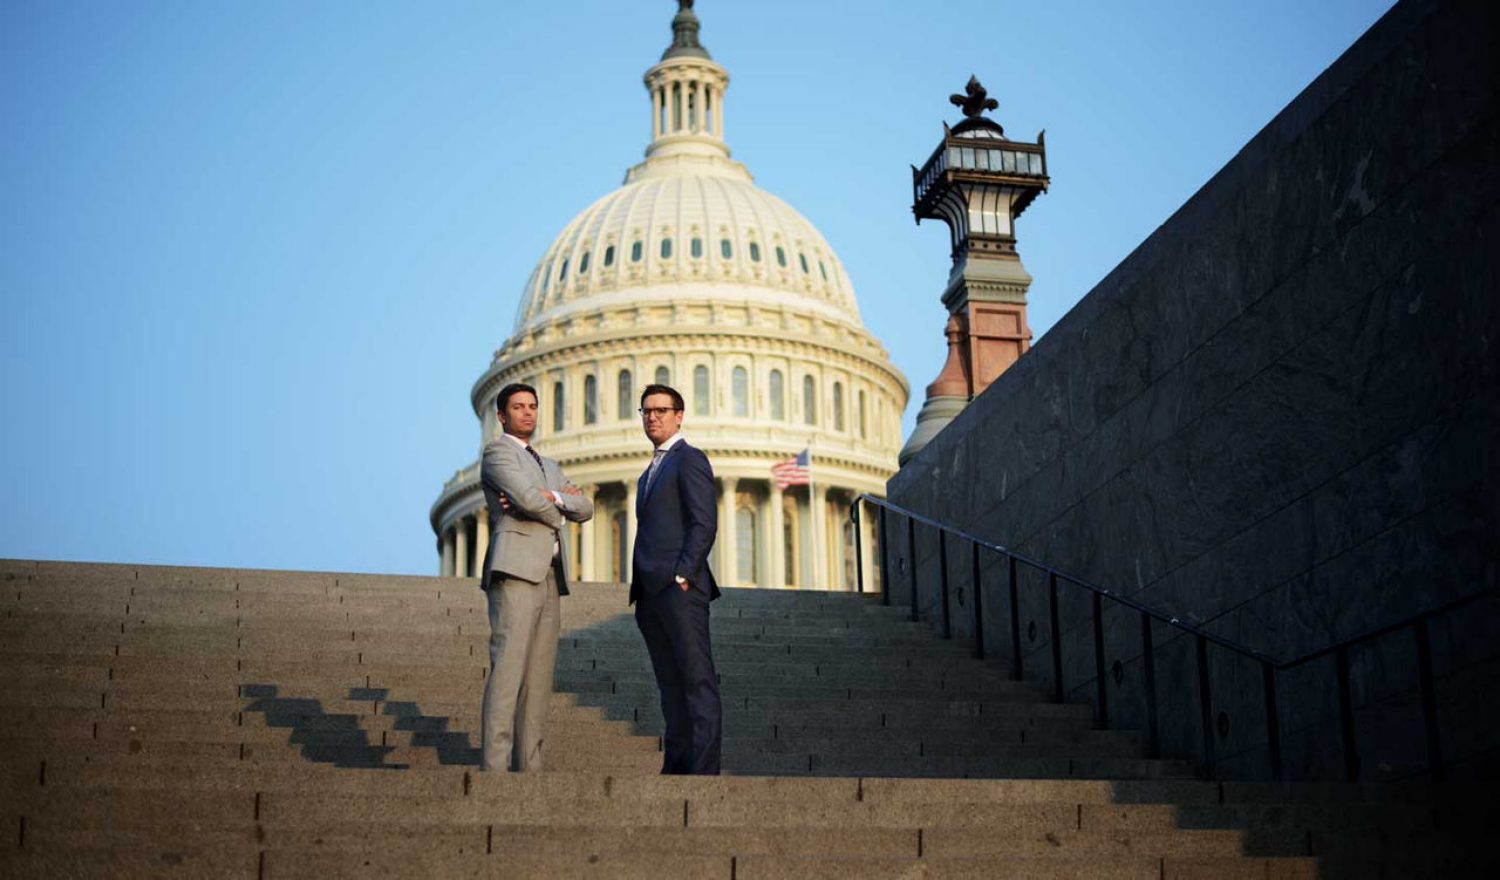 Lou Manzo ’06 and Brendan Downes ’07 photographed at the US Capital Building